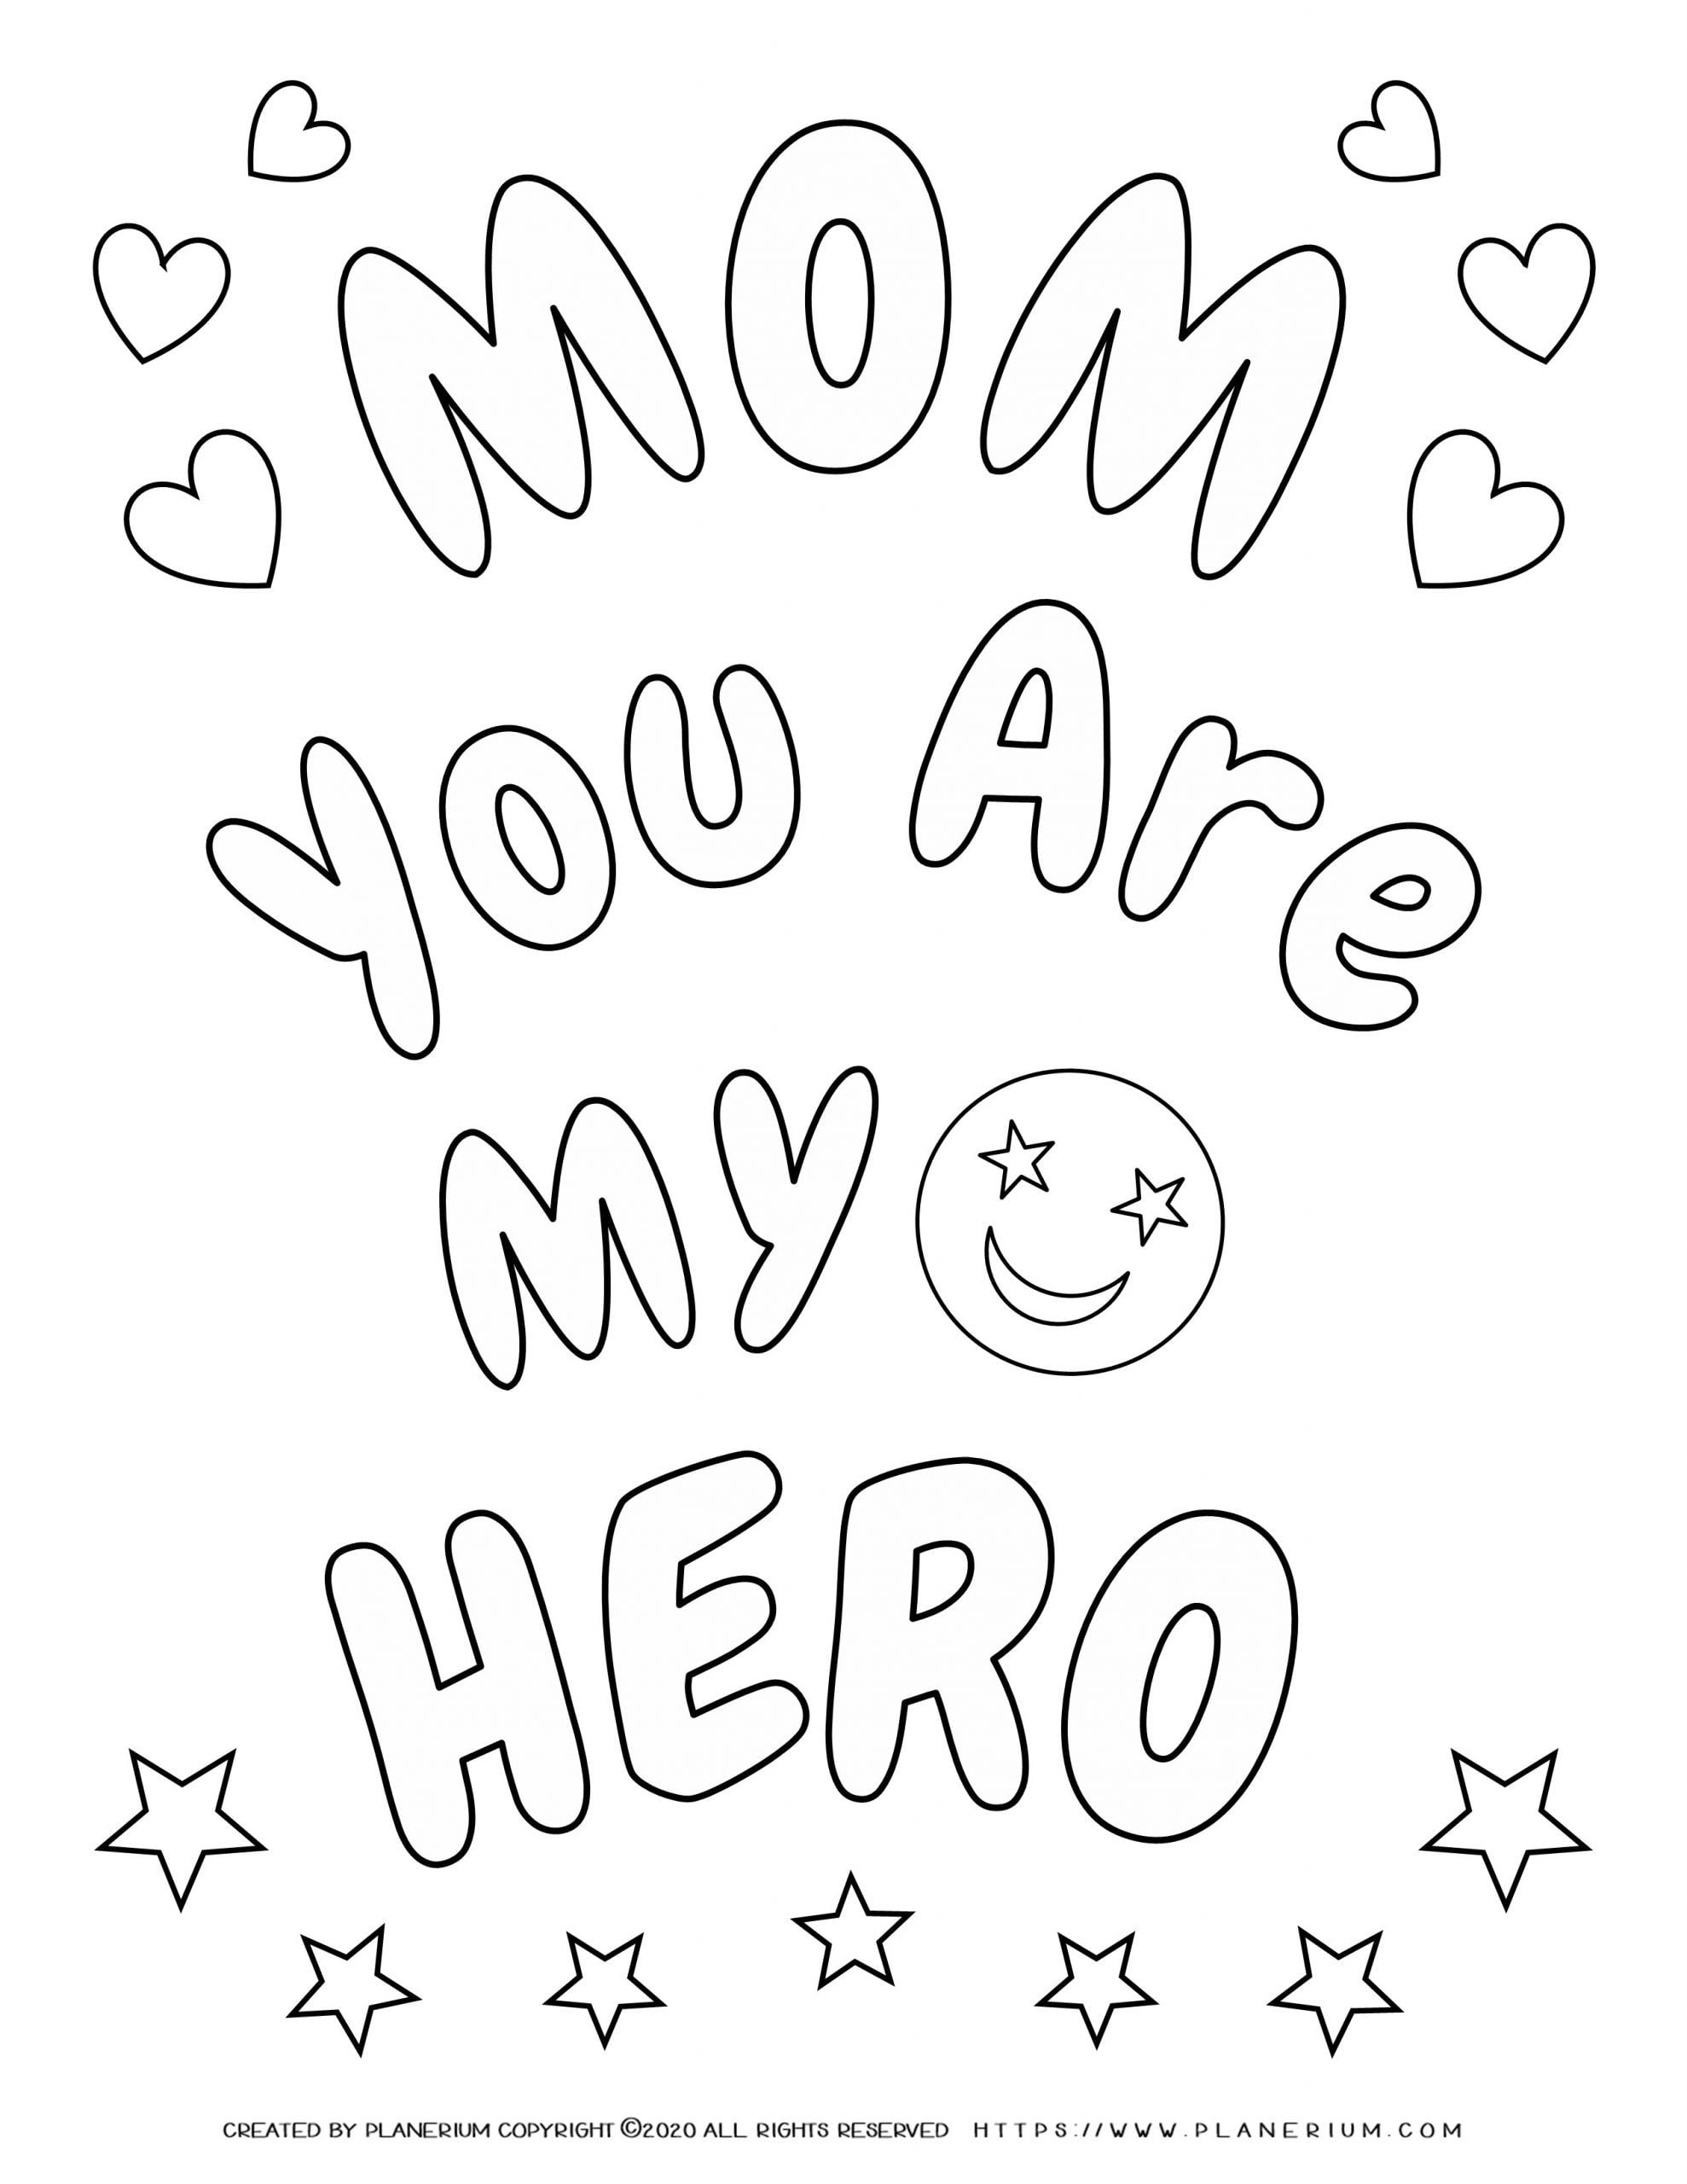 Mother's day - Coloring Page - Your'e my Hero